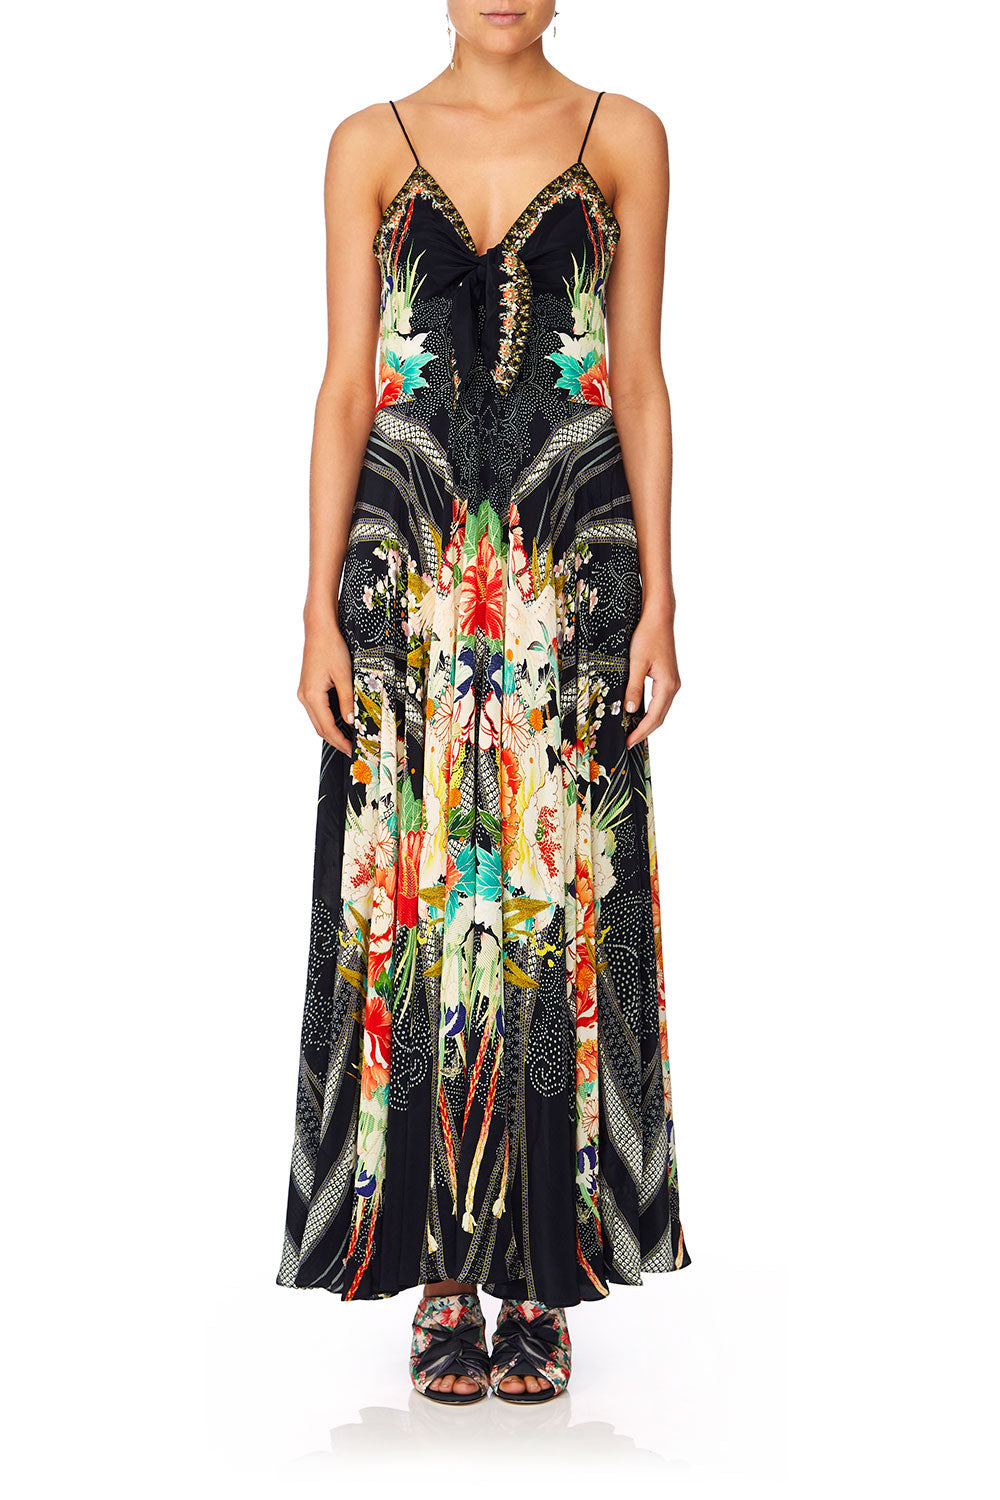 LONG DRESS WITH TIE FRONT QUEEN OF KINGS – CAMILLA